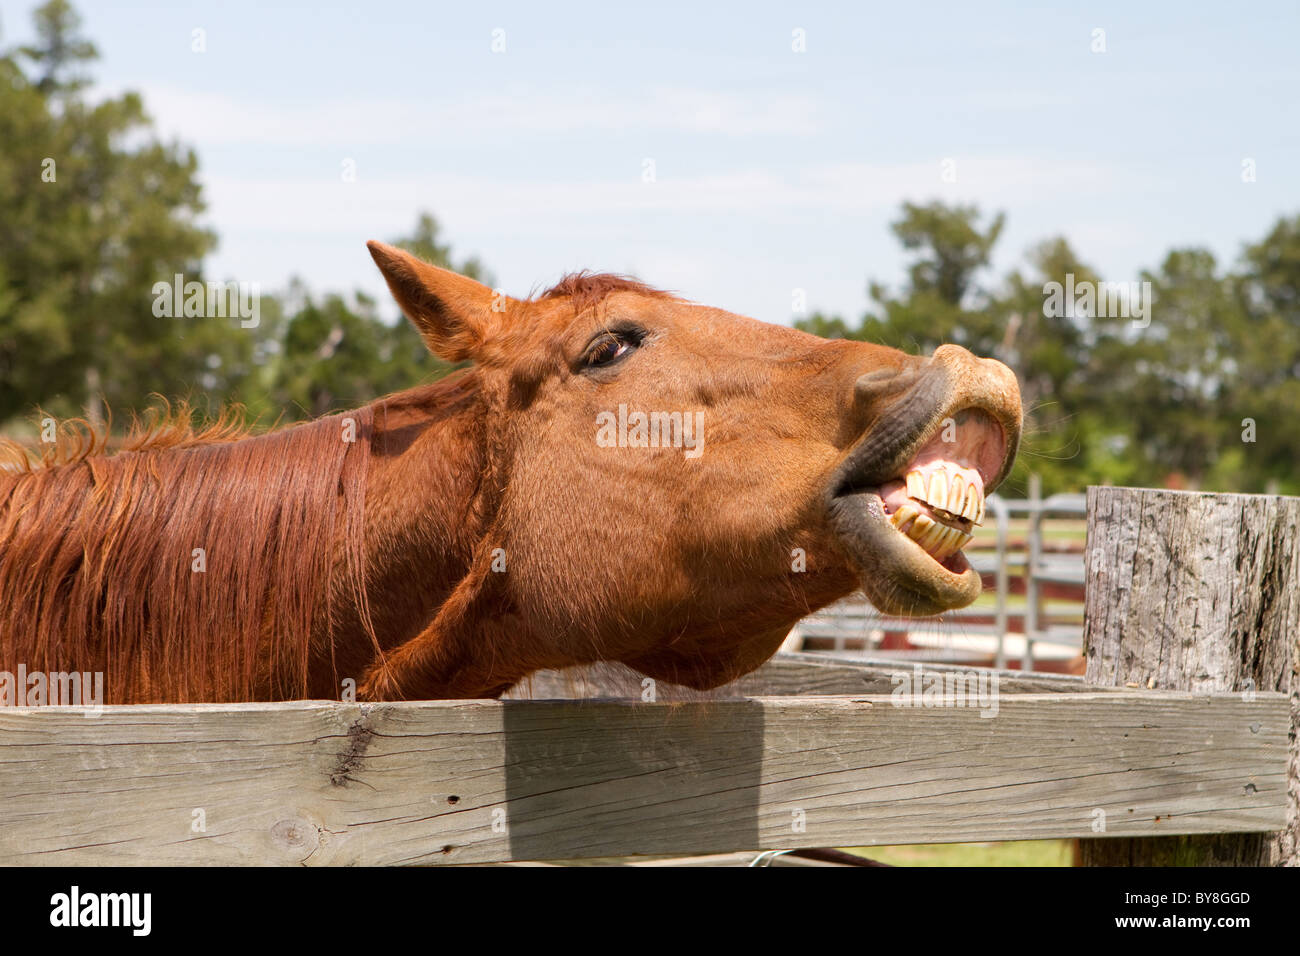 Bay horse by a fence whinnying and showing its teeth. Stock Photo